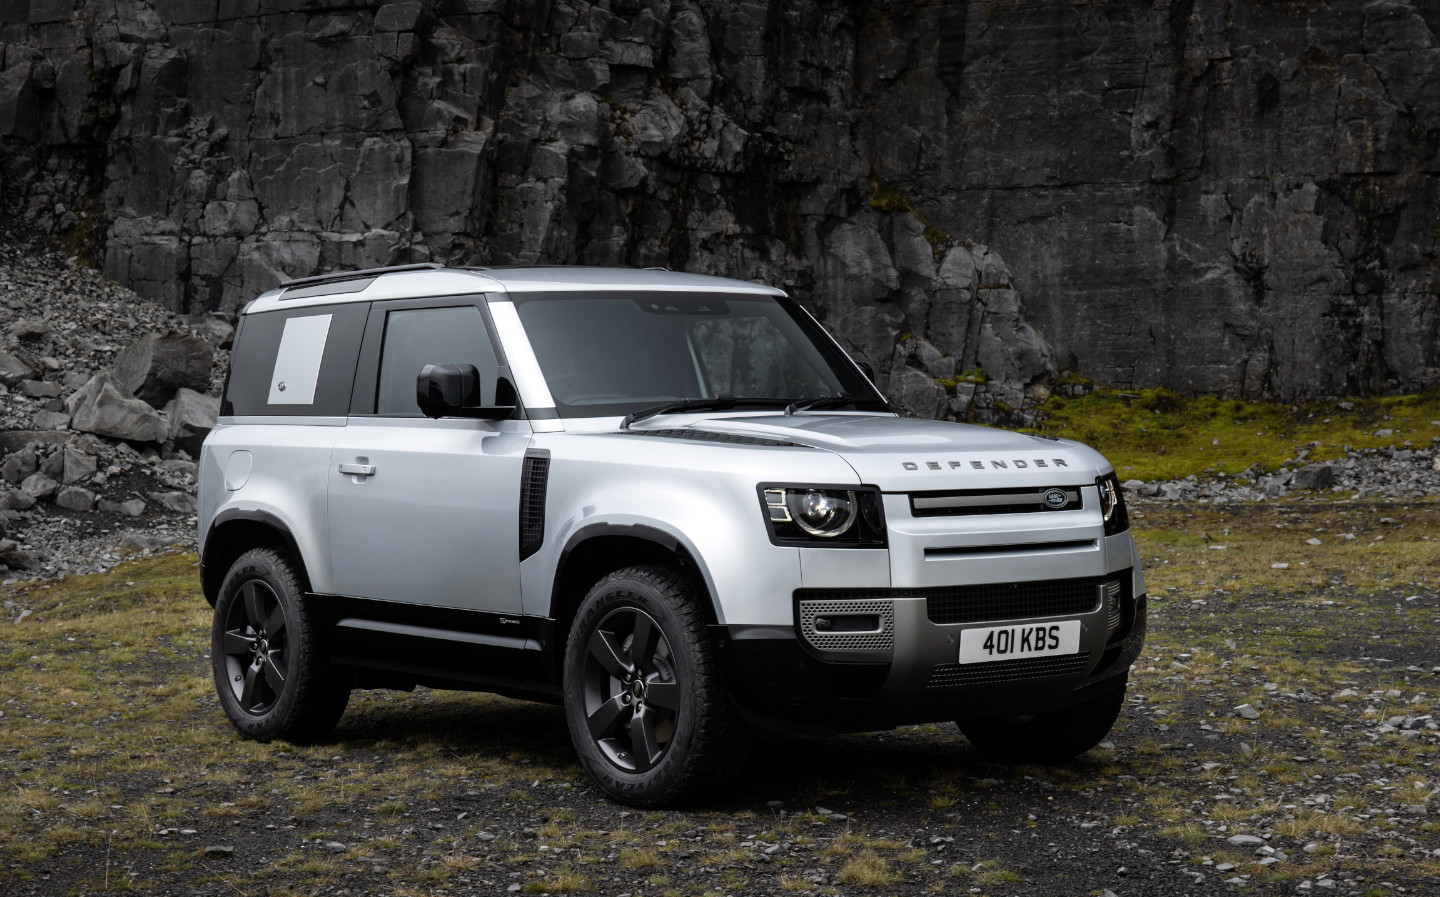 The Land Rover Defender X Dynamic